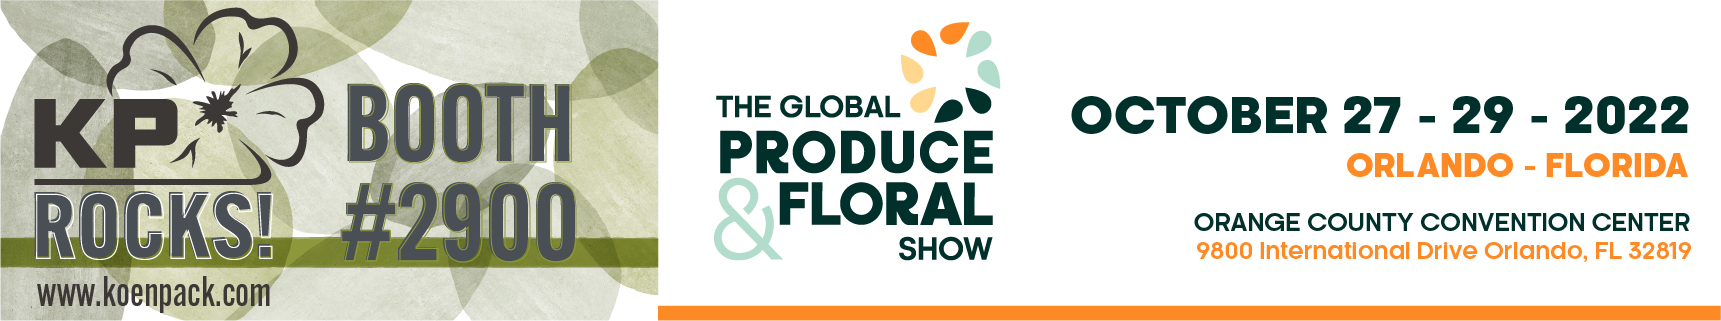 Global Produce & Floral Show